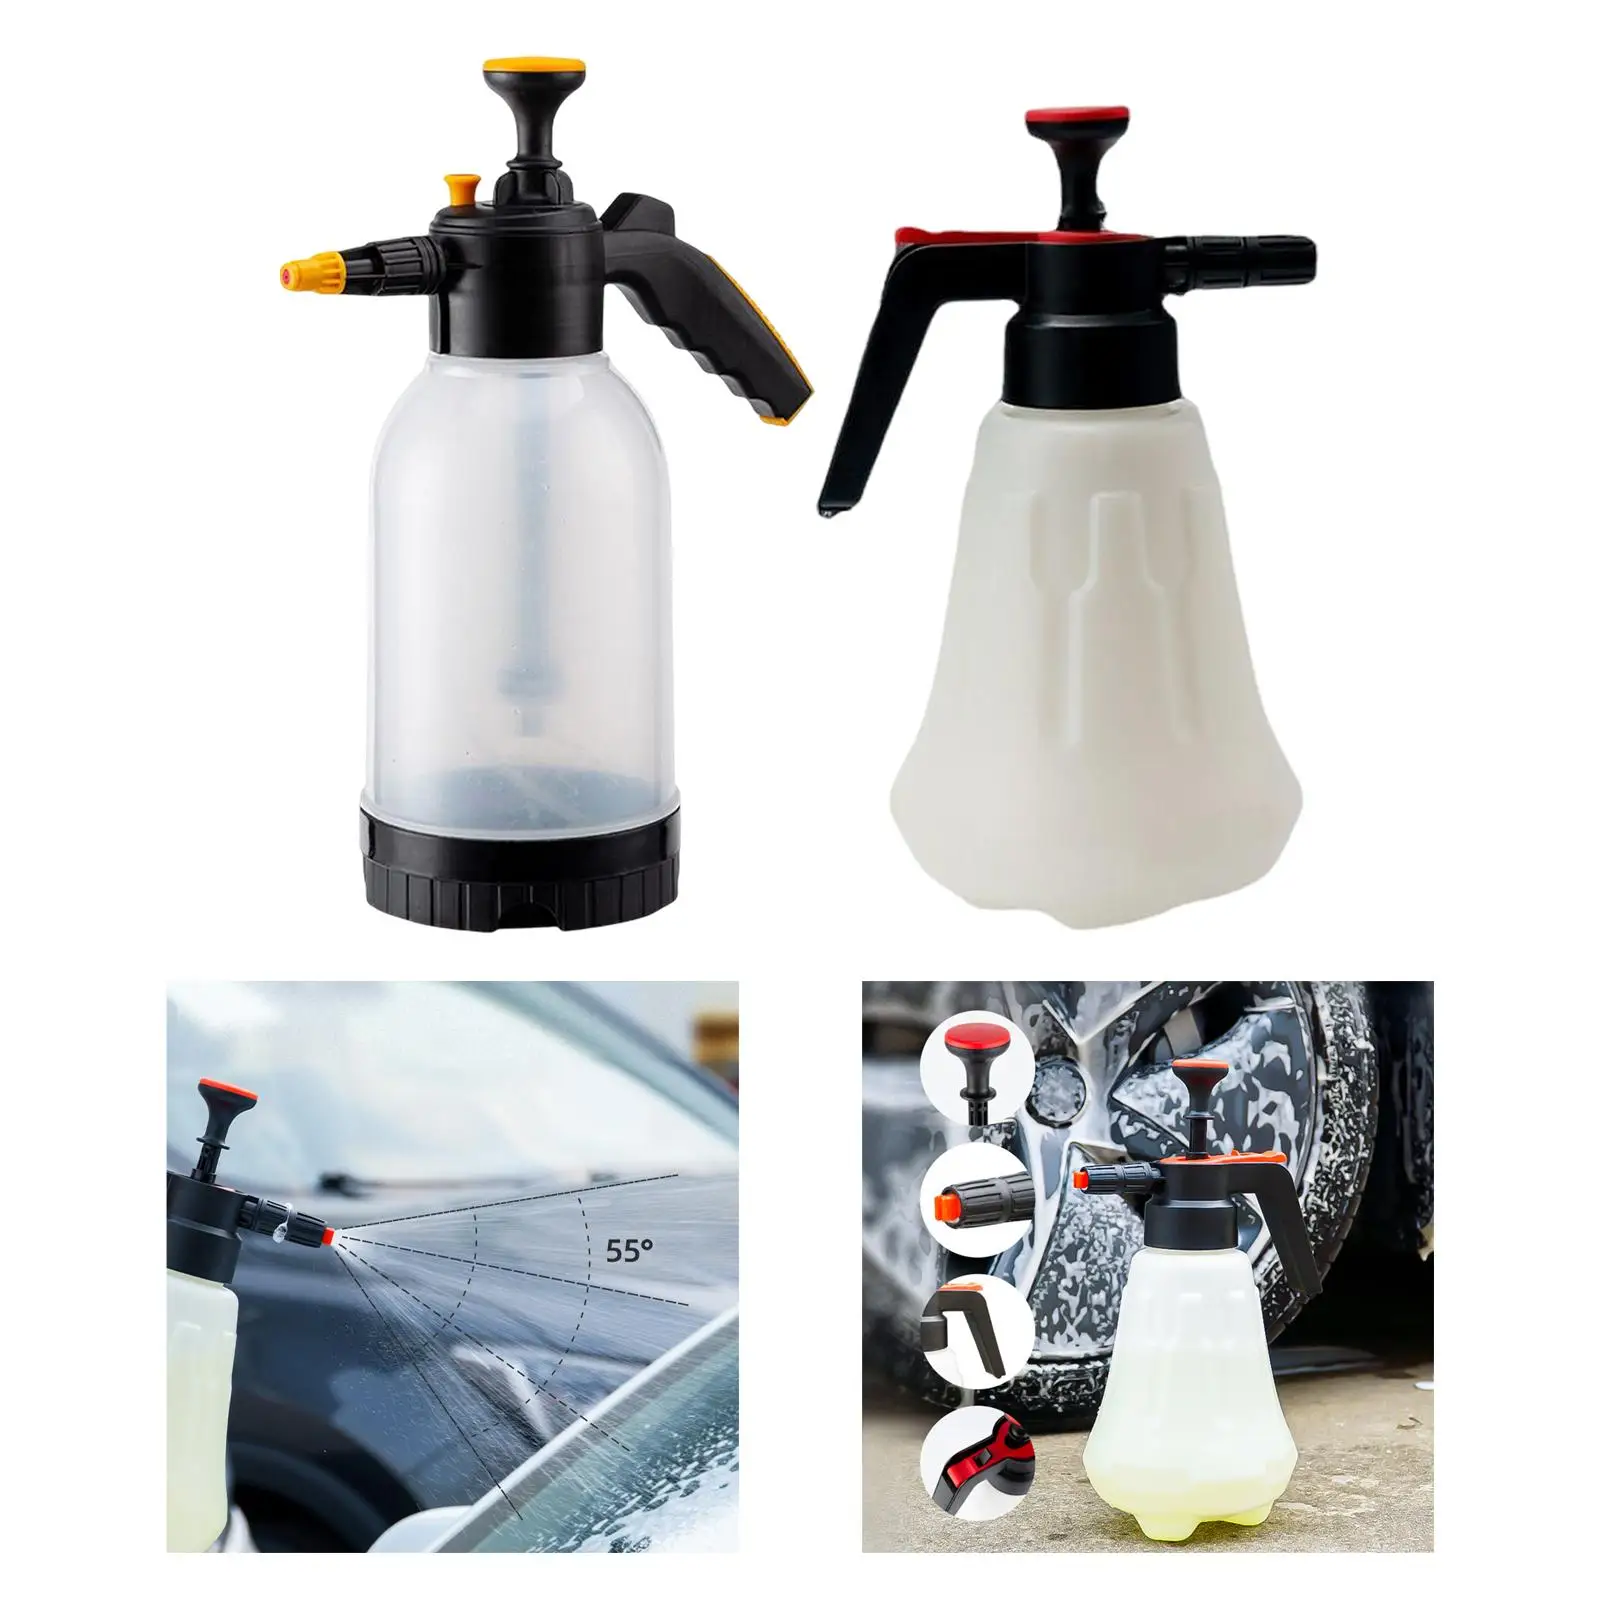 Durable Handheld Foam Sprayer Equipment Bottle Convenient Pressure Pump for House Cleaning Lawn Window Cleaning Car Wash